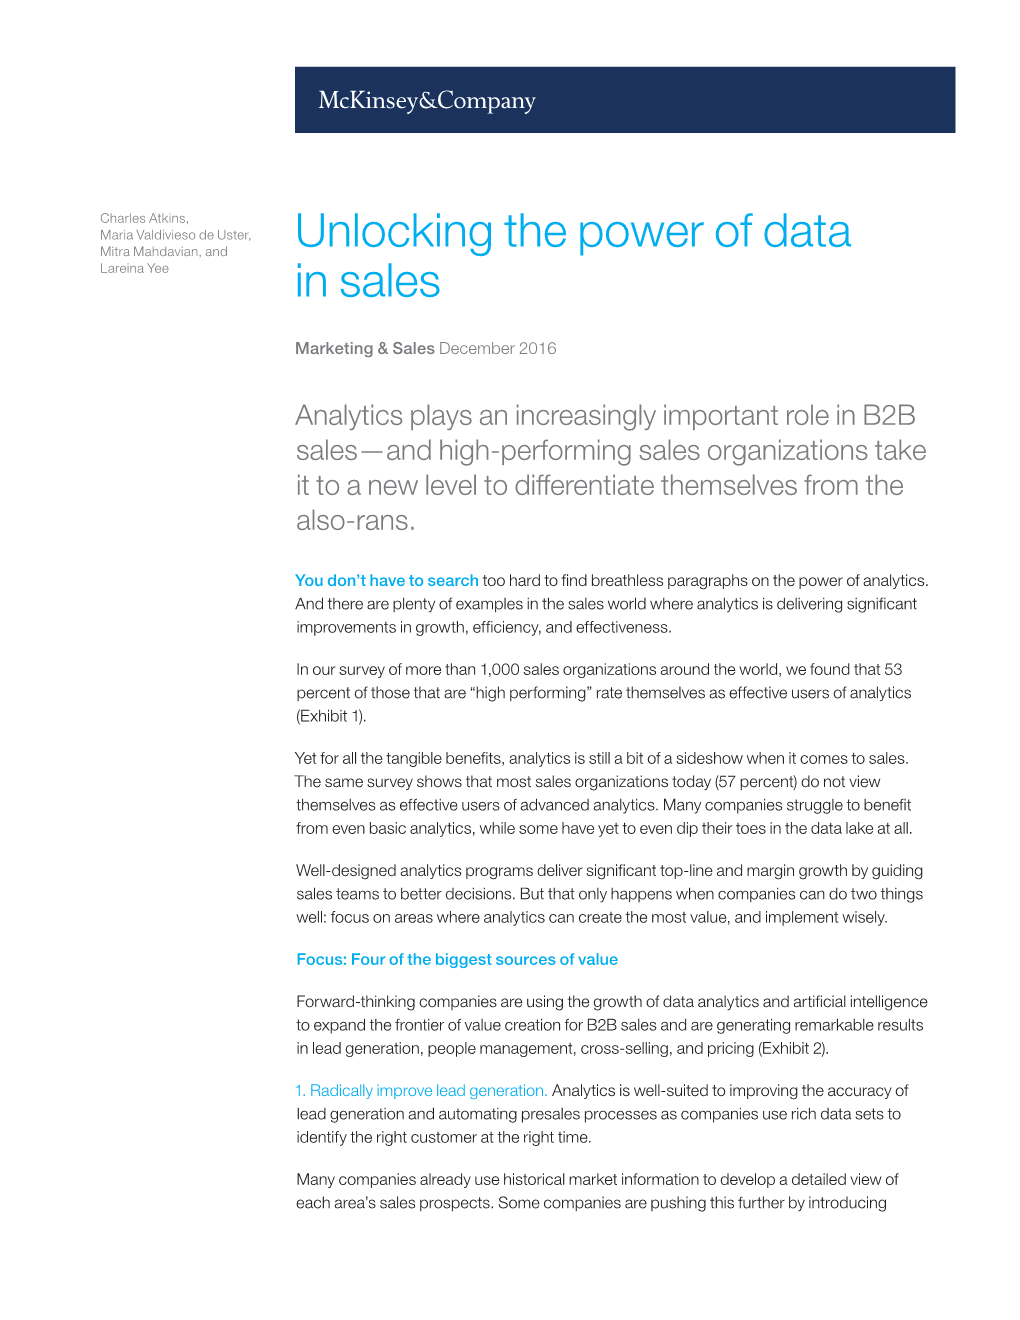 Unlocking the Power of Data in Sales